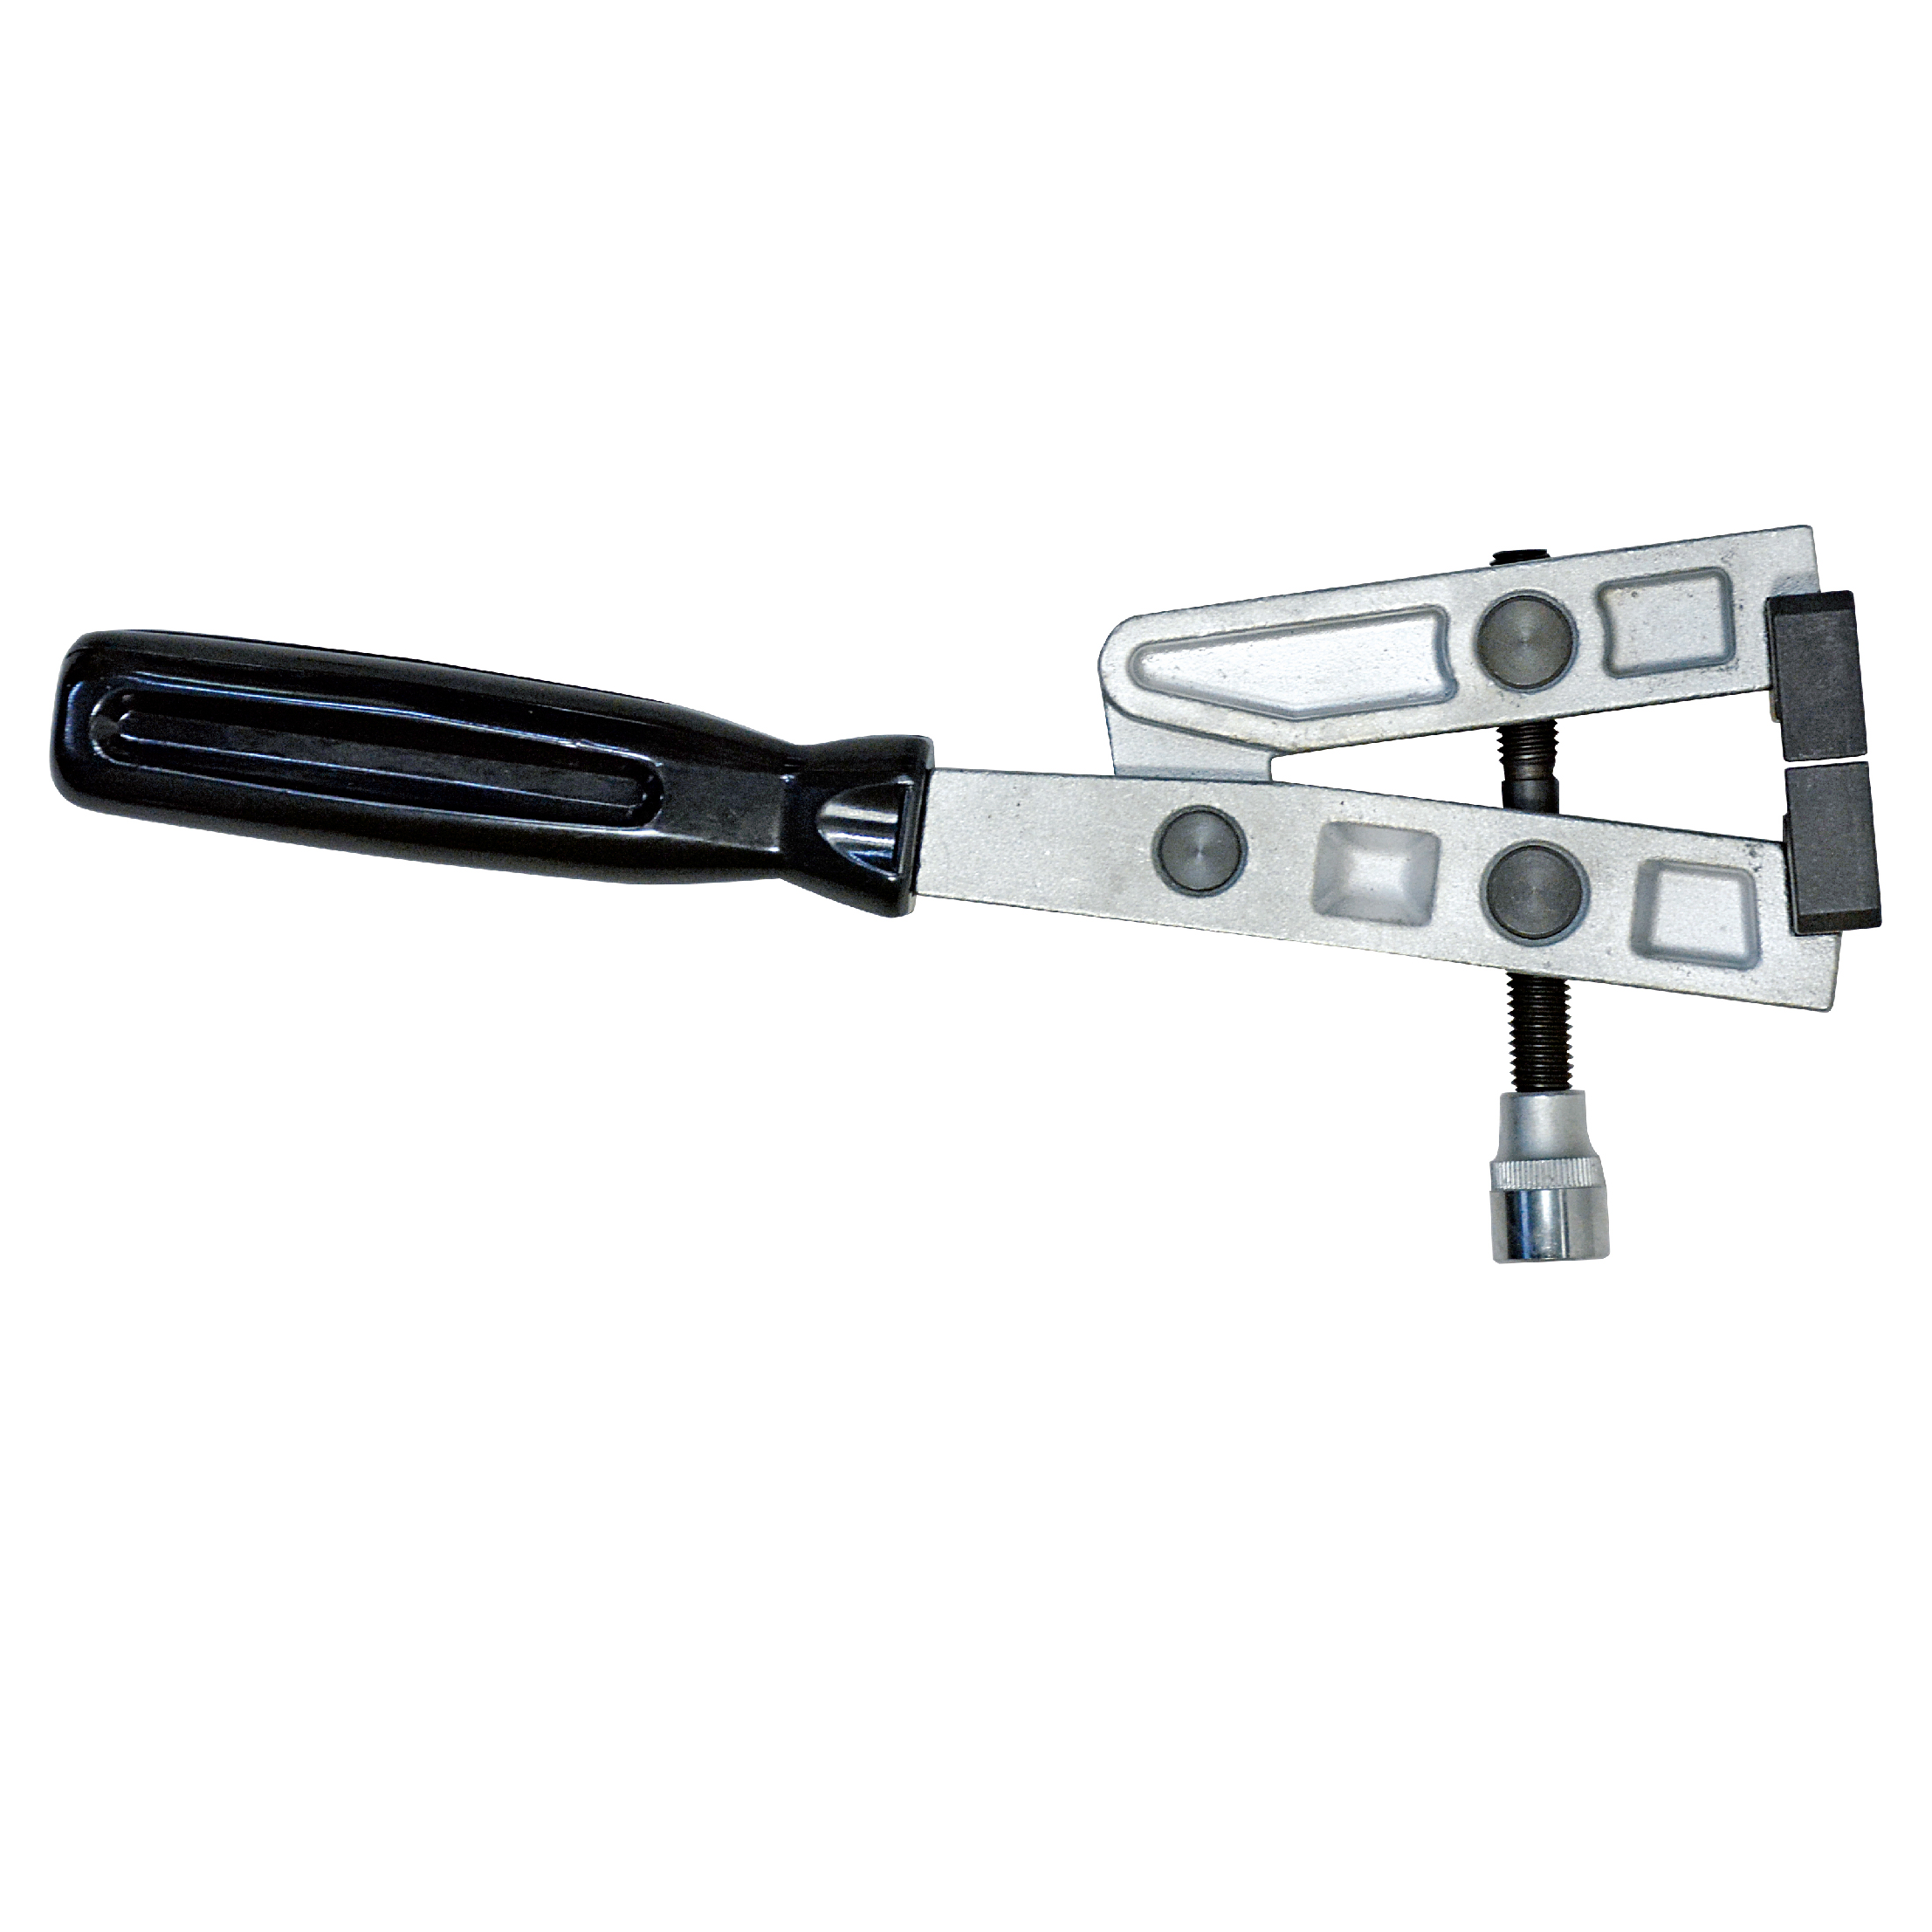 HEAVY DUTY CV BOOT BAND PLIER  (WITH TORQUE DRIVE)